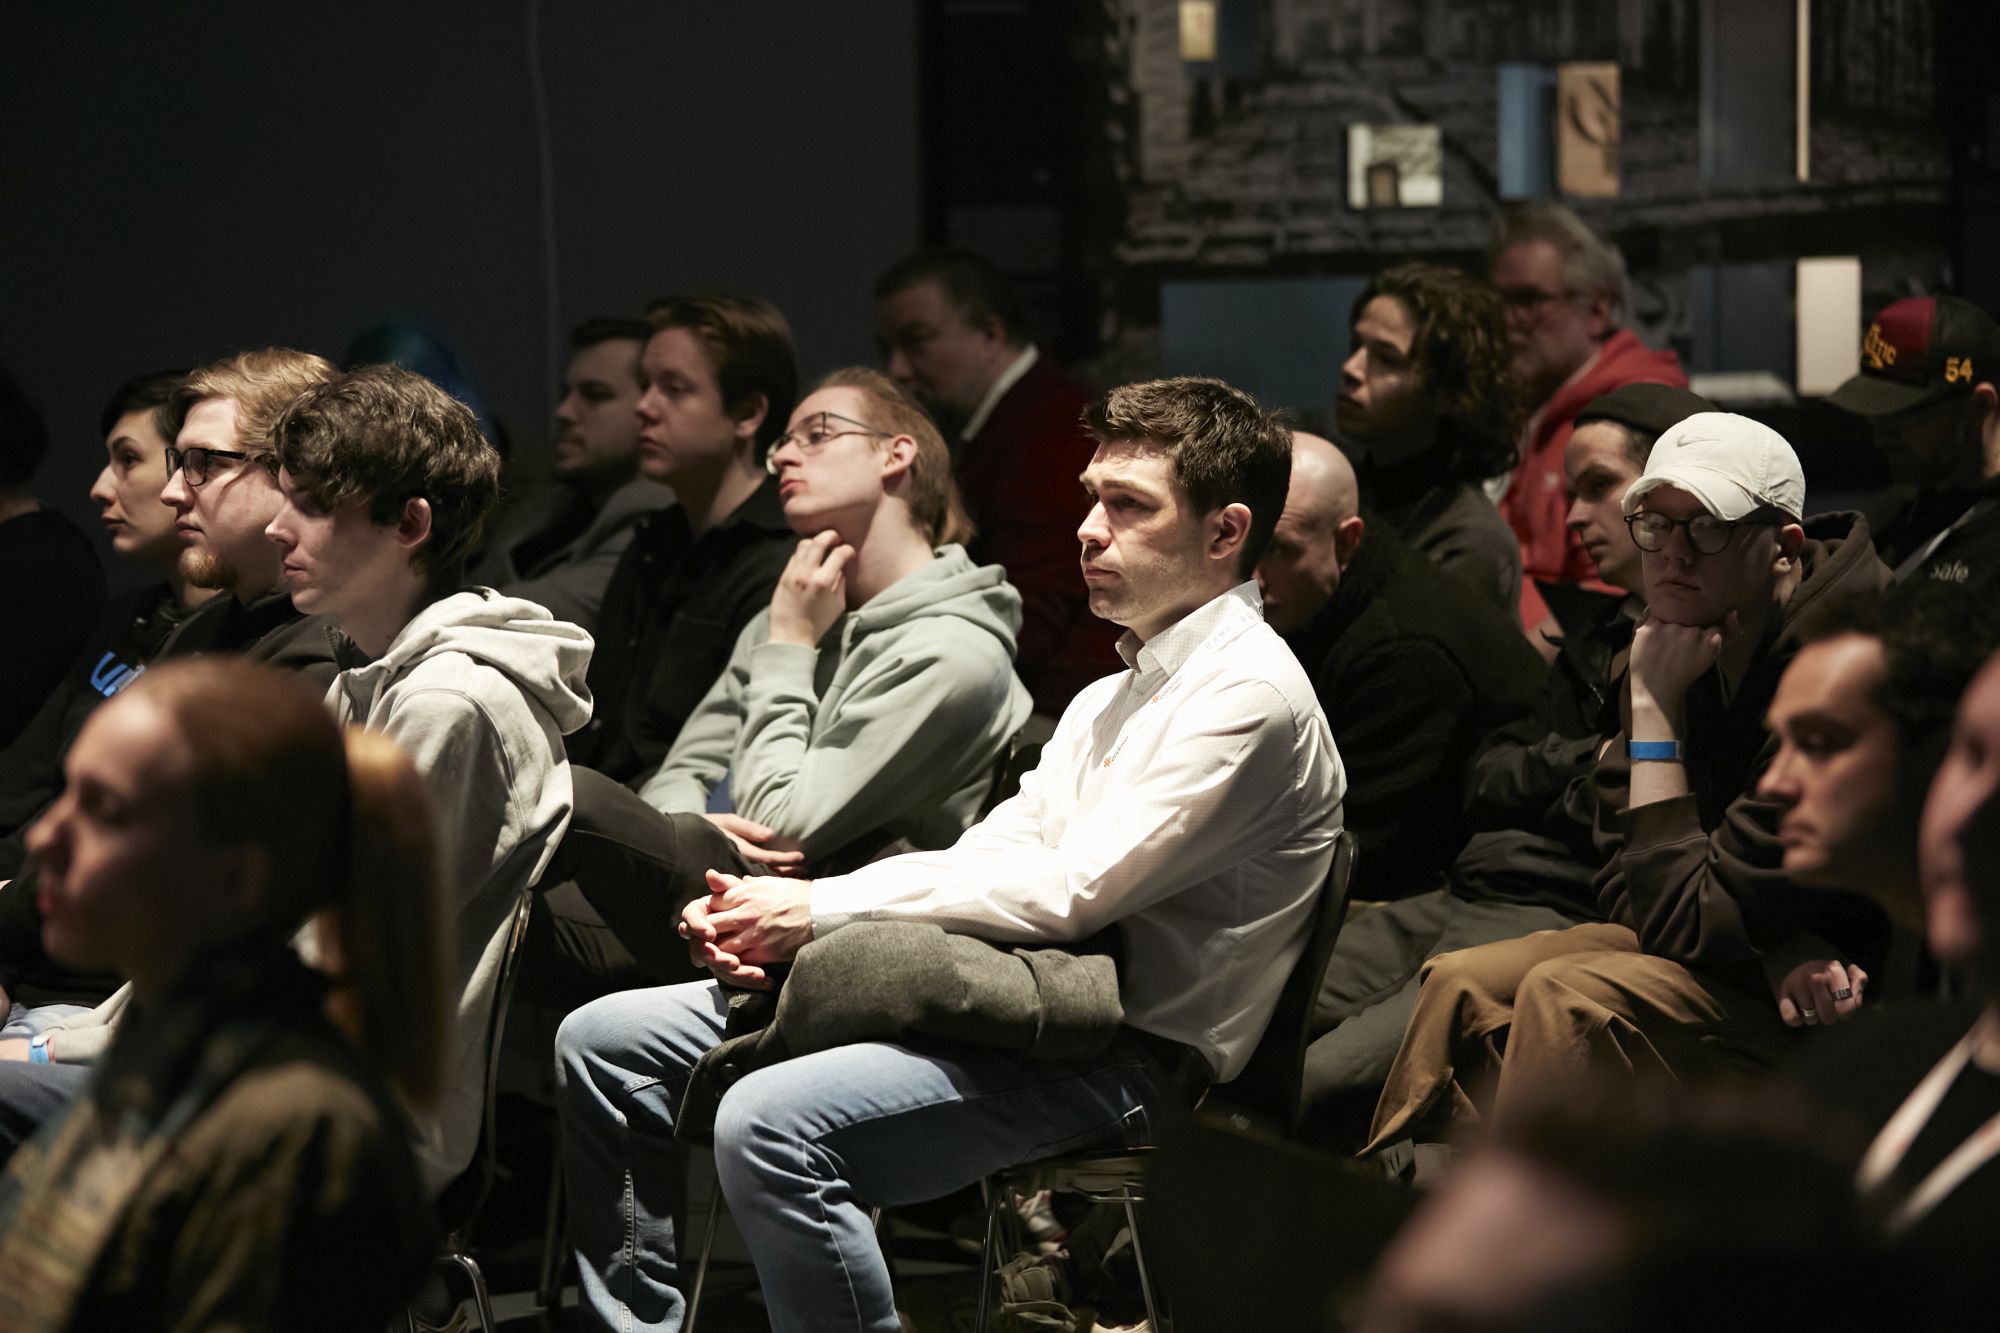 Conference audience at the Hamburg Games Conference 2023 | Photo by Rolf Otzipka